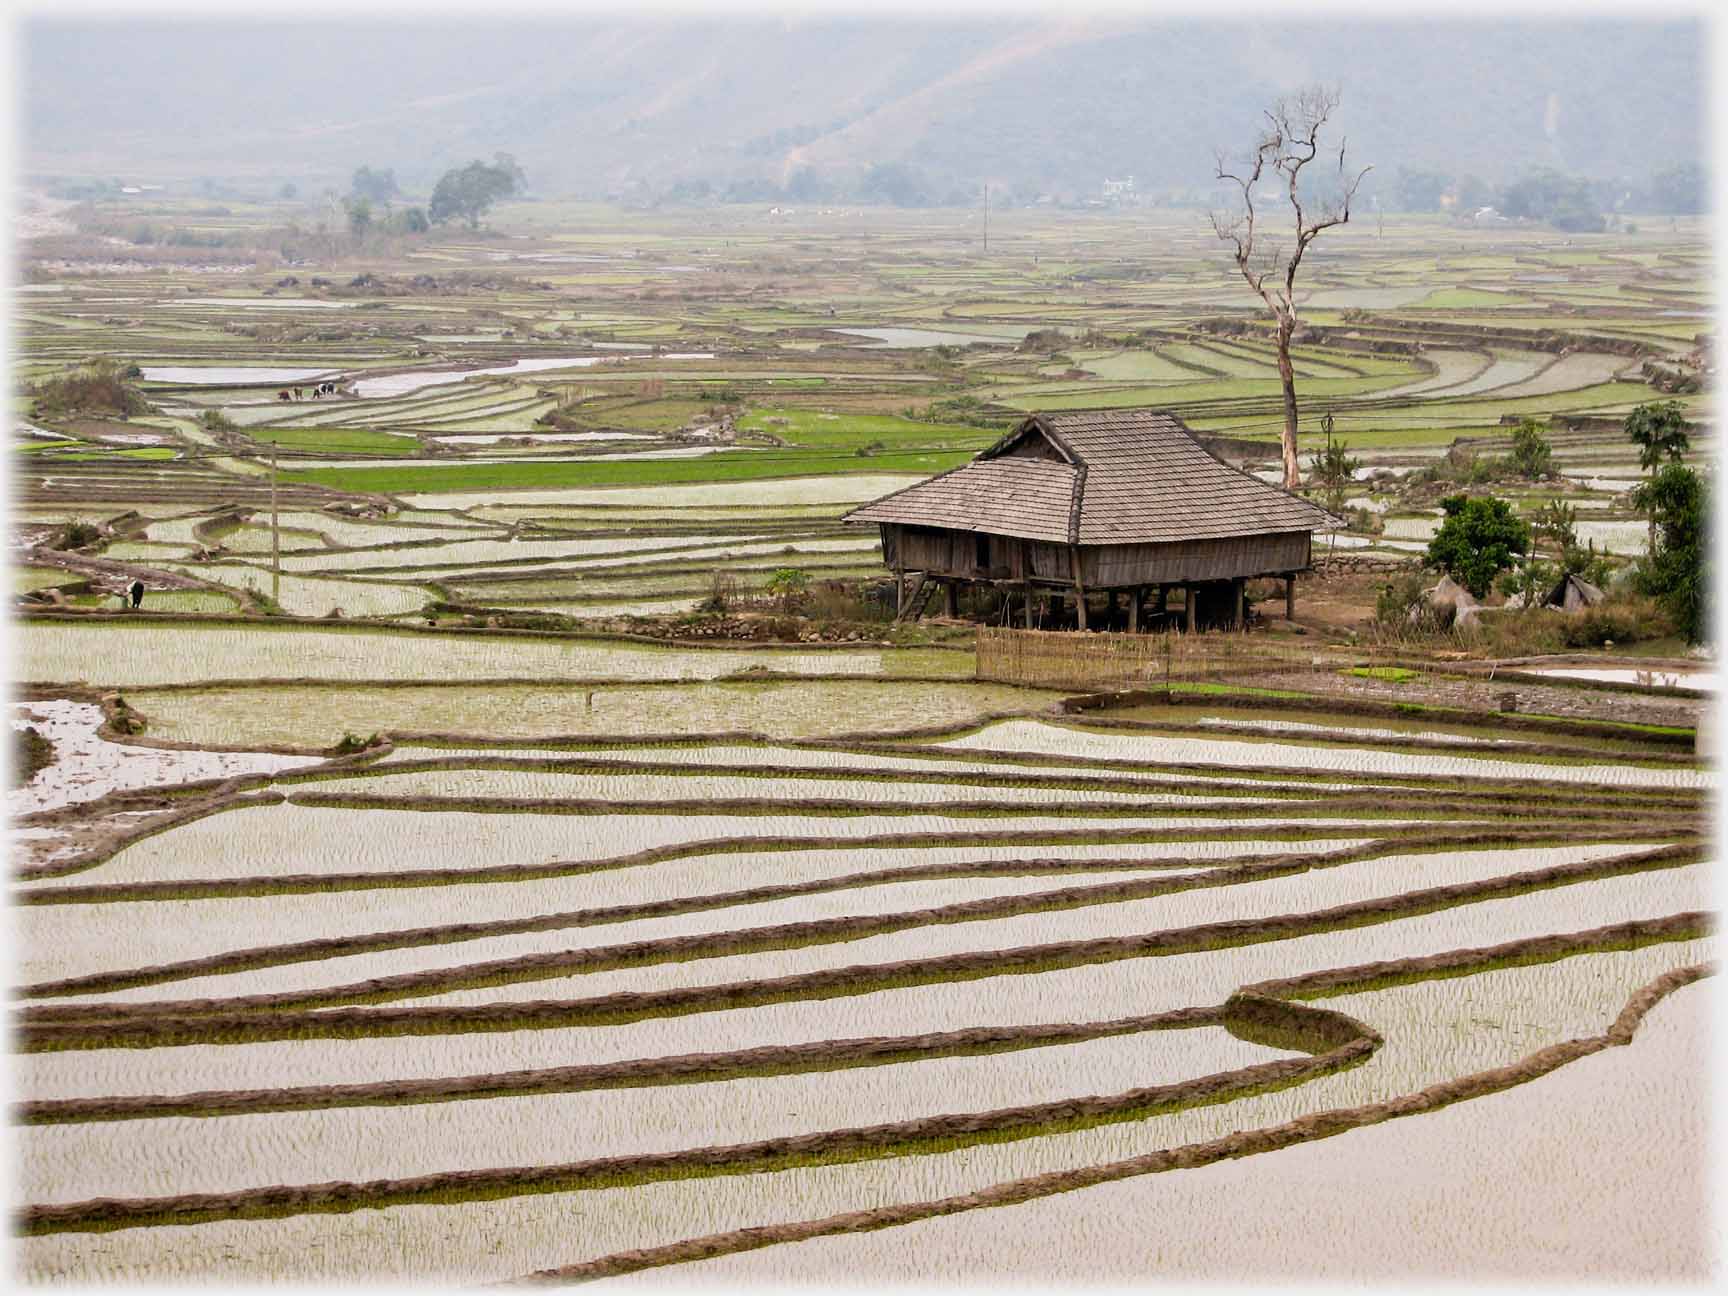 House with fields on newly planted paddy just showing.